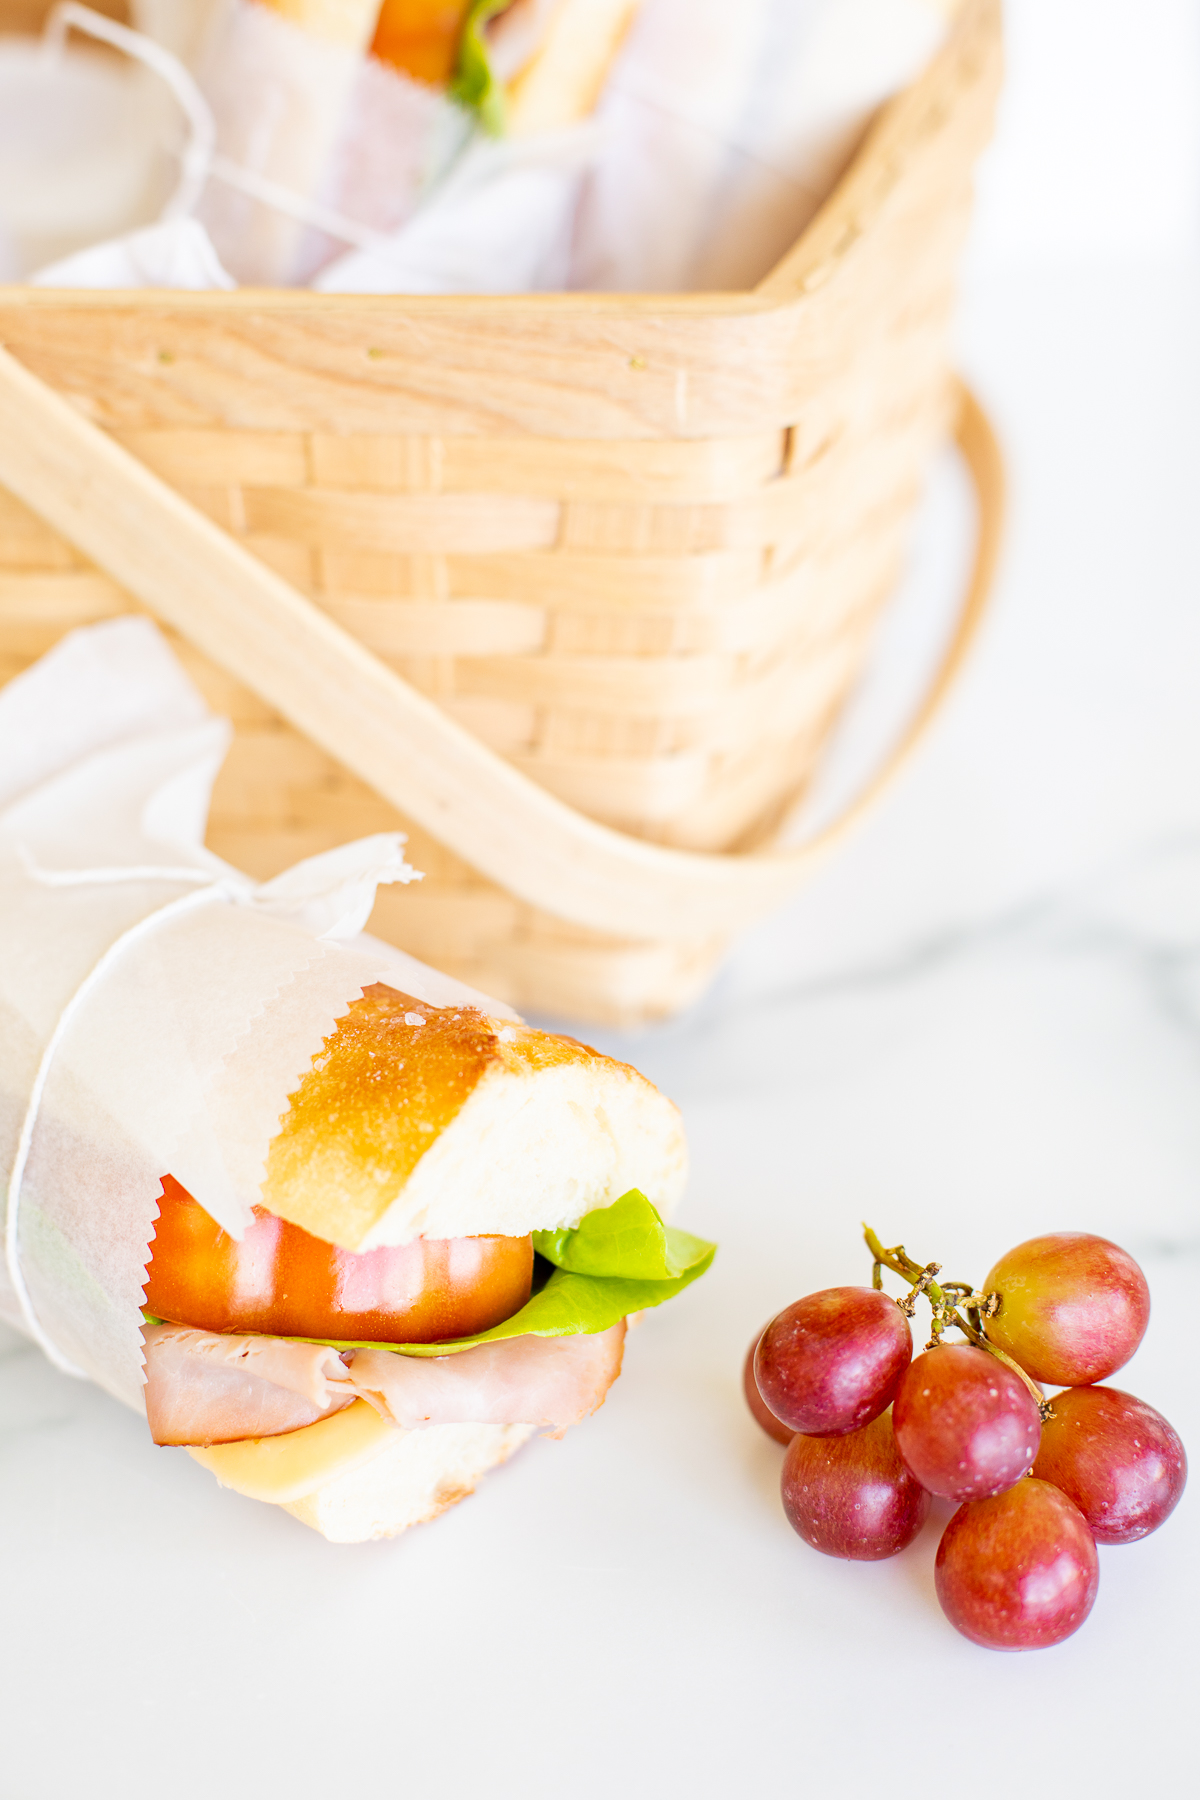 A picnic sandwich with grapes.